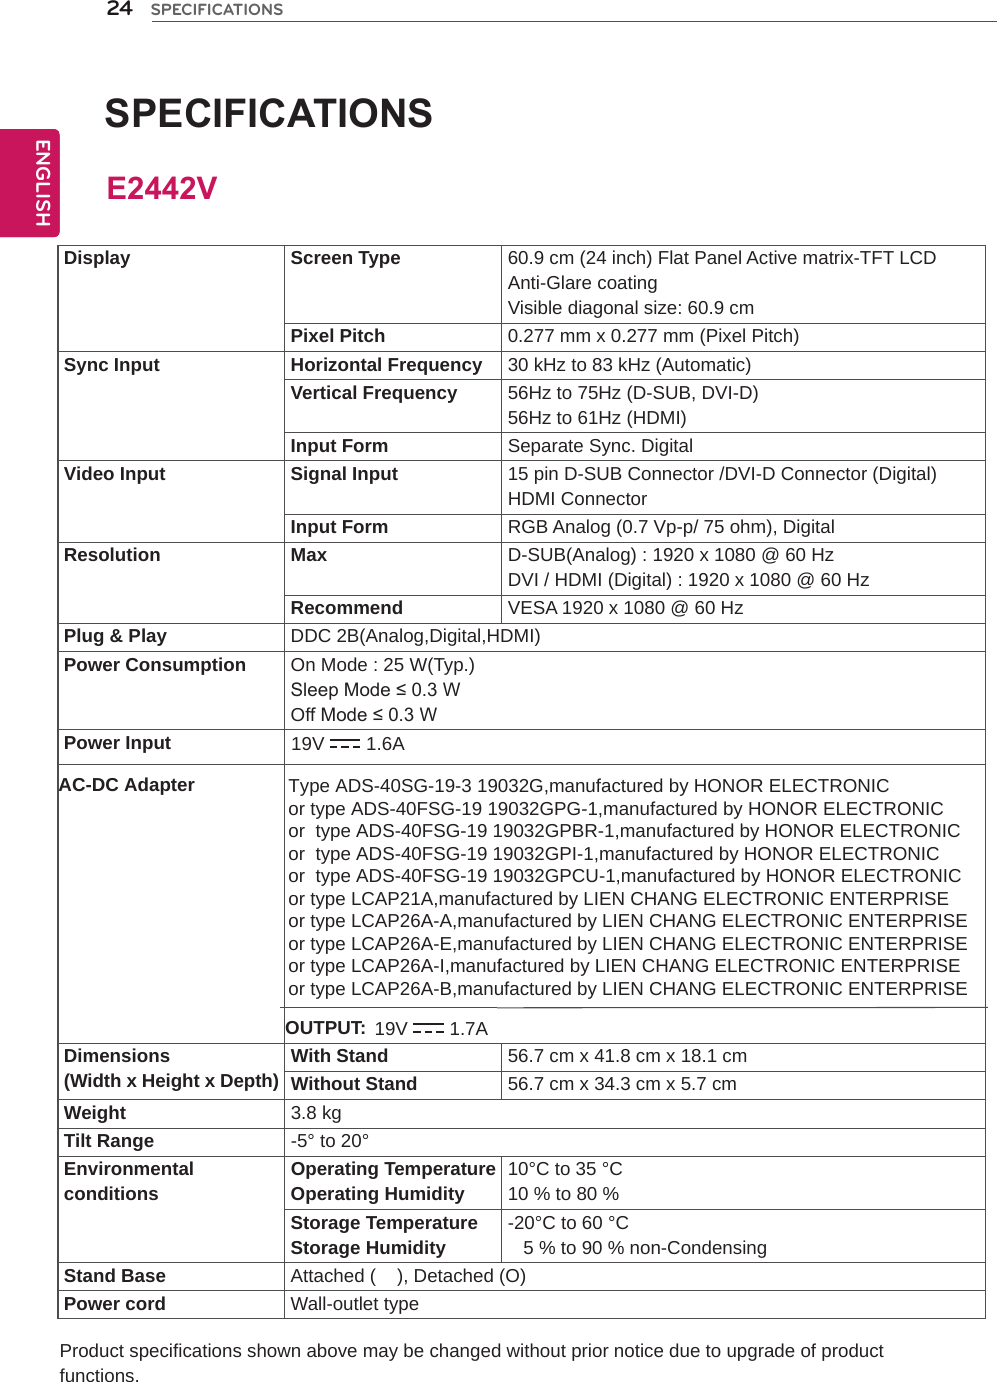 24ENGENGLISHSPECIFICATIONS  SPECIFICATIONS E2442VProduct specifications shown above may be changed without prior notice due to upgrade of product functions.Display Screen Type 60.9 cm (24 inch) Flat Panel Active matrix-TFT LCDAnti-Glare coatingVisible diagonal size: 60.9 cmPixel Pitch 0.277 mm x 0.277 mm (Pixel Pitch)Sync Input Horizontal Frequency 30 kHz to 83 kHz (Automatic)Vertical Frequency 56Hz to 75Hz (D-SUB, DVI-D)56Hz to 61Hz (HDMI)Input Form Separate Sync. DigitalVideo Input Signal Input 15 pin D-SUB Connector /DVI-D Connector (Digital)HDMI ConnectorInput Form RGB Analog (0.7 Vp-p/ 75 ohm), DigitalResolution Max D-SUB(Analog) : 1920 x 1080 @ 60 HzDVI / HDMI (Digital) : 1920 x 1080 @ 60 HzRecommend VESA 1920 x 1080 @ 60 HzPlug &amp; Play DDC 2B(Analog,Digital,HDMI)Power Consumption On Mode : 25 W(Typ.)Sleep Mode ≤ 0.3 W Off Mode ≤ 0.3 W Power InputDimensions(Width x Height x Depth) With Stand 56.7 cm x 41.8 cm x 18.1 cmWithout Stand 56.7 cm x 34.3 cm x 5.7 cmWeight 3.8 kgTilt Range -5° to 20°Environmentalconditions Operating TemperatureOperating Humidity 10°C to 35 °C10 % to 80 % Storage TemperatureStorage Humidity -20°C to 60 °C   5 % to 90 % non-CondensingStand Base Attached (    ), Detached (O)Power cord Wall-outlet type19V 1.6AAC-DC Adapter Type ADS-40SG-19-3 19032G,manufactured by HONOR ELECTRONICor type ADS-40FSG-19 19032GPG-1,manufactured by HONOR ELECTRONICor  type ADS-40FSG-19 19032GPBR-1,manufactured by HONOR ELECTRONICor  type ADS-40FSG-19 19032GPI-1,manufactured by HONOR ELECTRONIC or  type ADS-40FSG-19 19032GPCU-1,manufactured by HONOR ELECTRONIC or type LCAP21A,manufactured by LIEN CHANG ELECTRONIC ENTERPRISEor type LCAP26A-A,manufactured by LIEN CHANG ELECTRONIC ENTERPRISEor type LCAP26A-E,manufactured by LIEN CHANG ELECTRONIC ENTERPRISEor type LCAP26A-I,manufactured by LIEN CHANG ELECTRONIC ENTERPRISEor type LCAP26A-B,manufactured by LIEN CHANG ELECTRONIC ENTERPRISEOUTPUT: 19V 1.7A